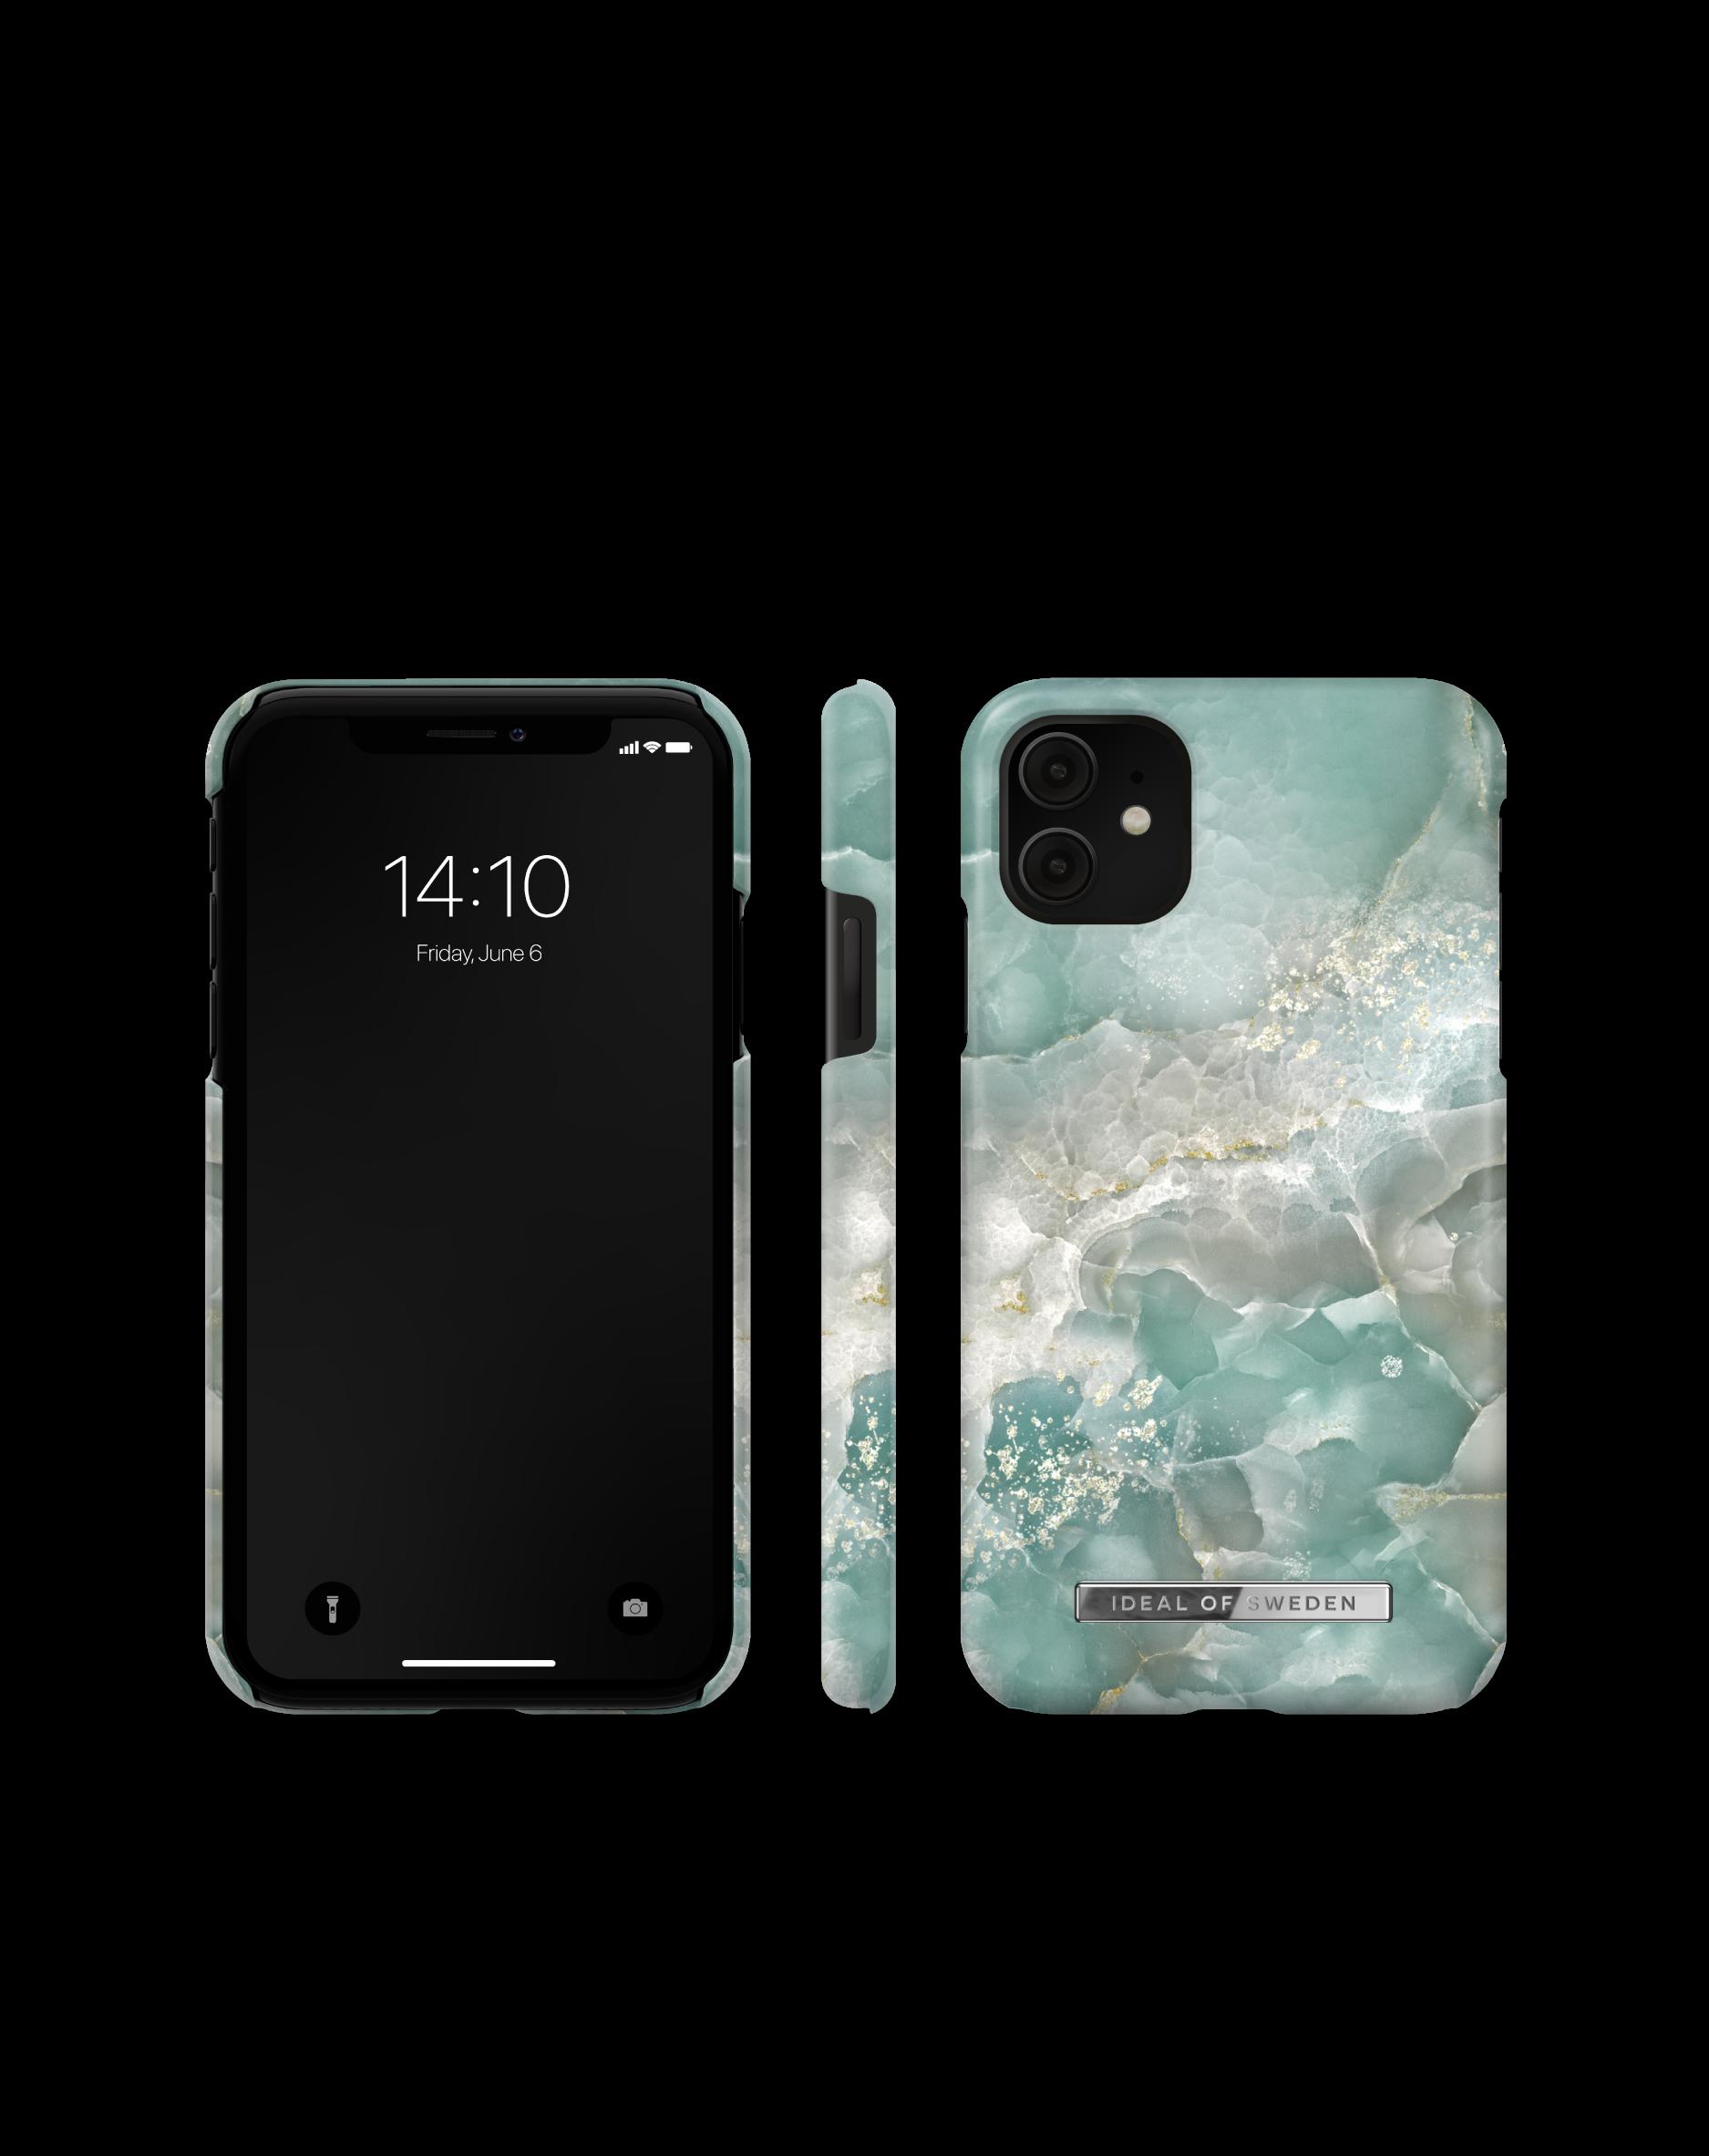 IDEAL OF Apple, Marble iPhone Backcover, / XR, Azura SWEDEN iPhone 11 IDFCSS22-I1961-391